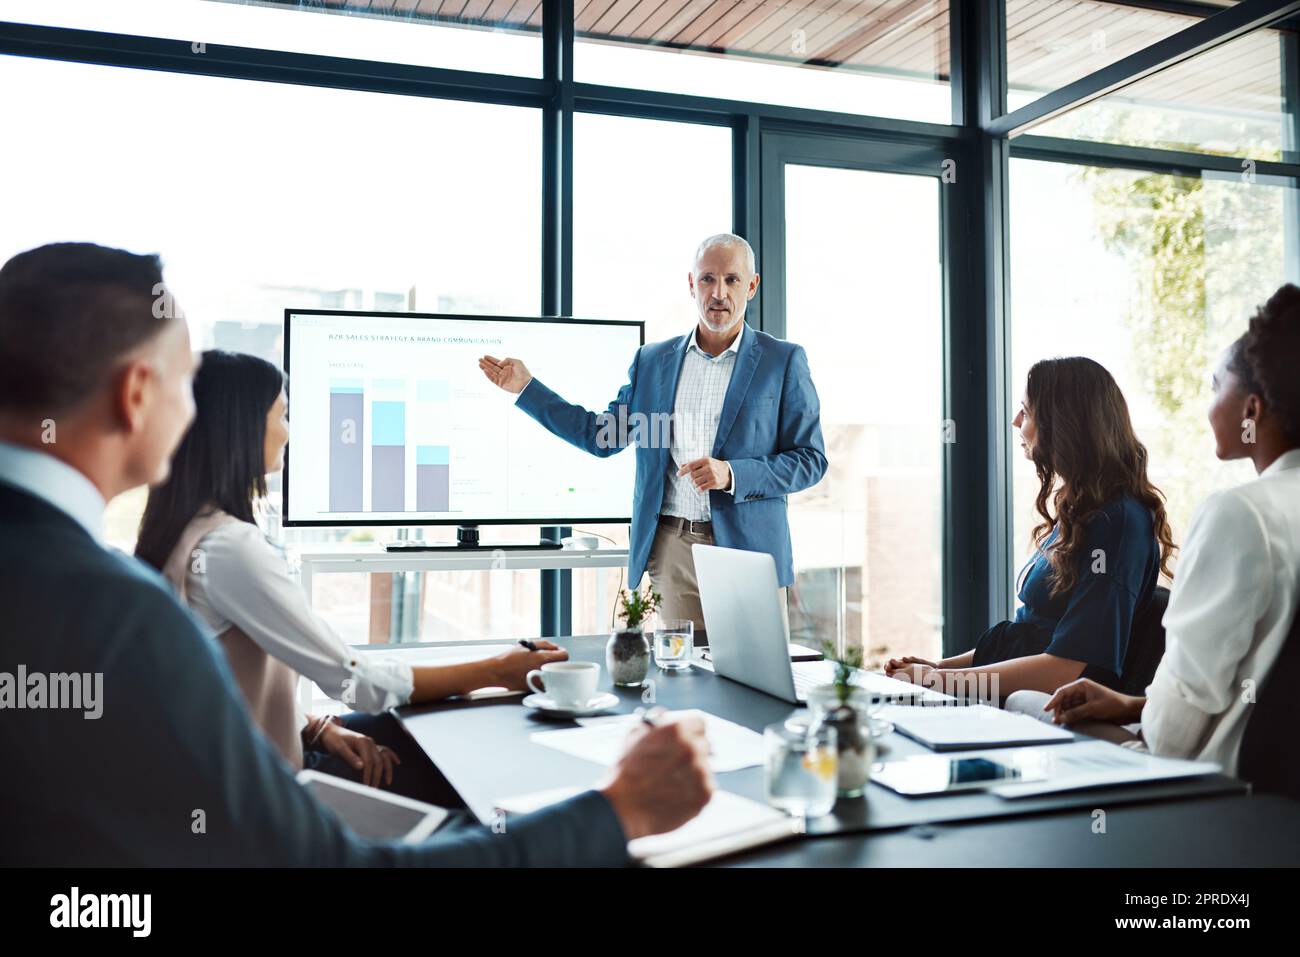 Education, training or learning on screen in business boardroom meeting to analyze data, chart or report. Manager with team of motivated executives in workshop presentation to plan vision or strategy Stock Photo